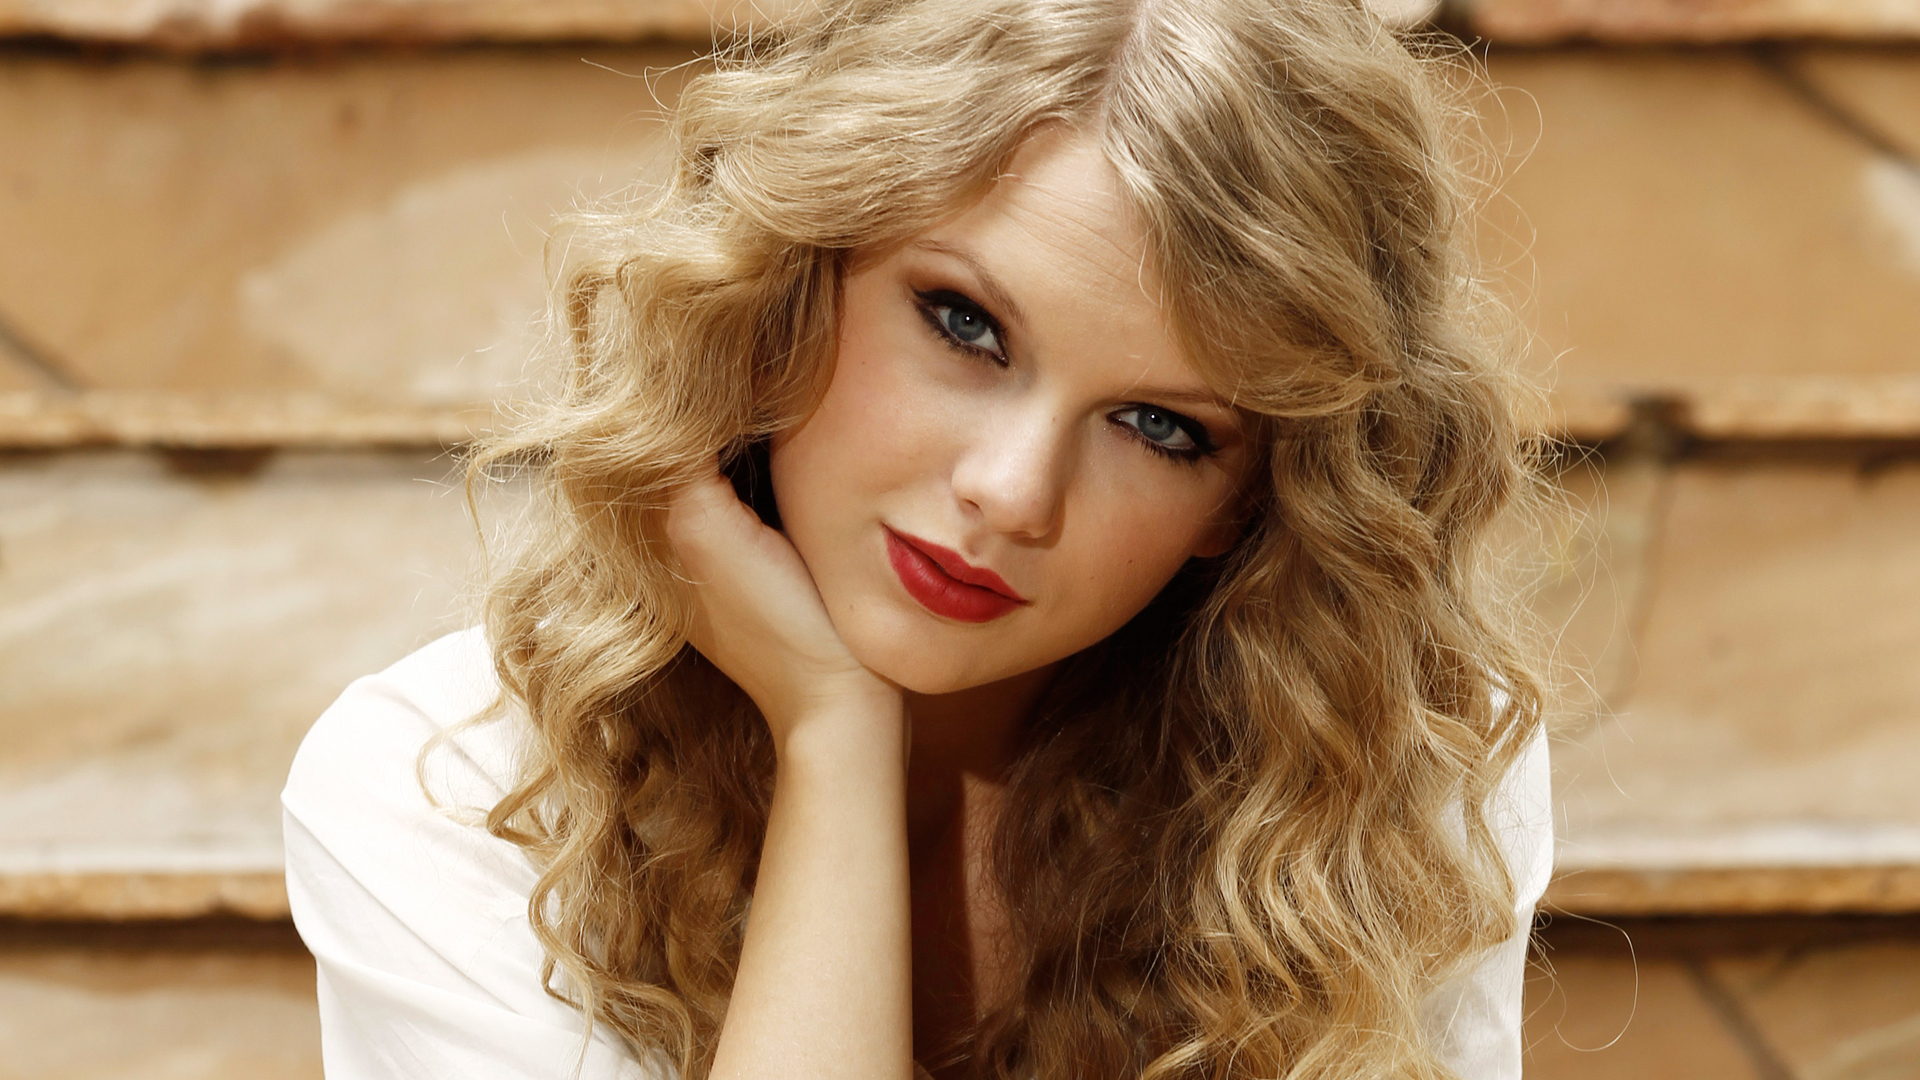 Taylor Swift Wallpaper Pictures Image